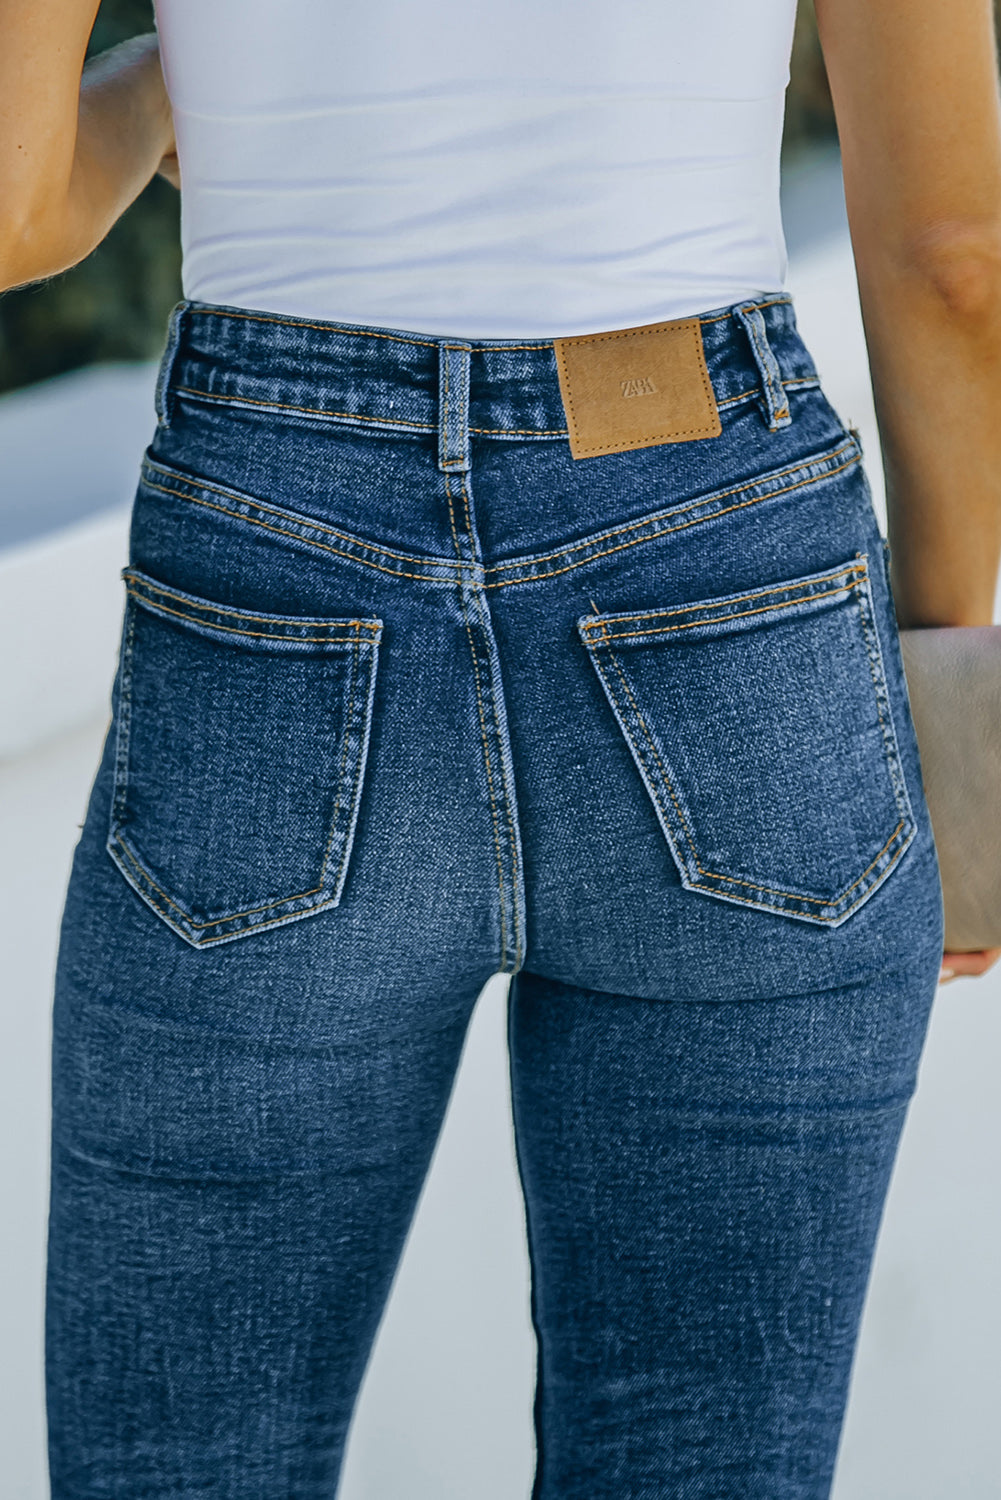 Ankle-Length Skinny Jeans with Pockets